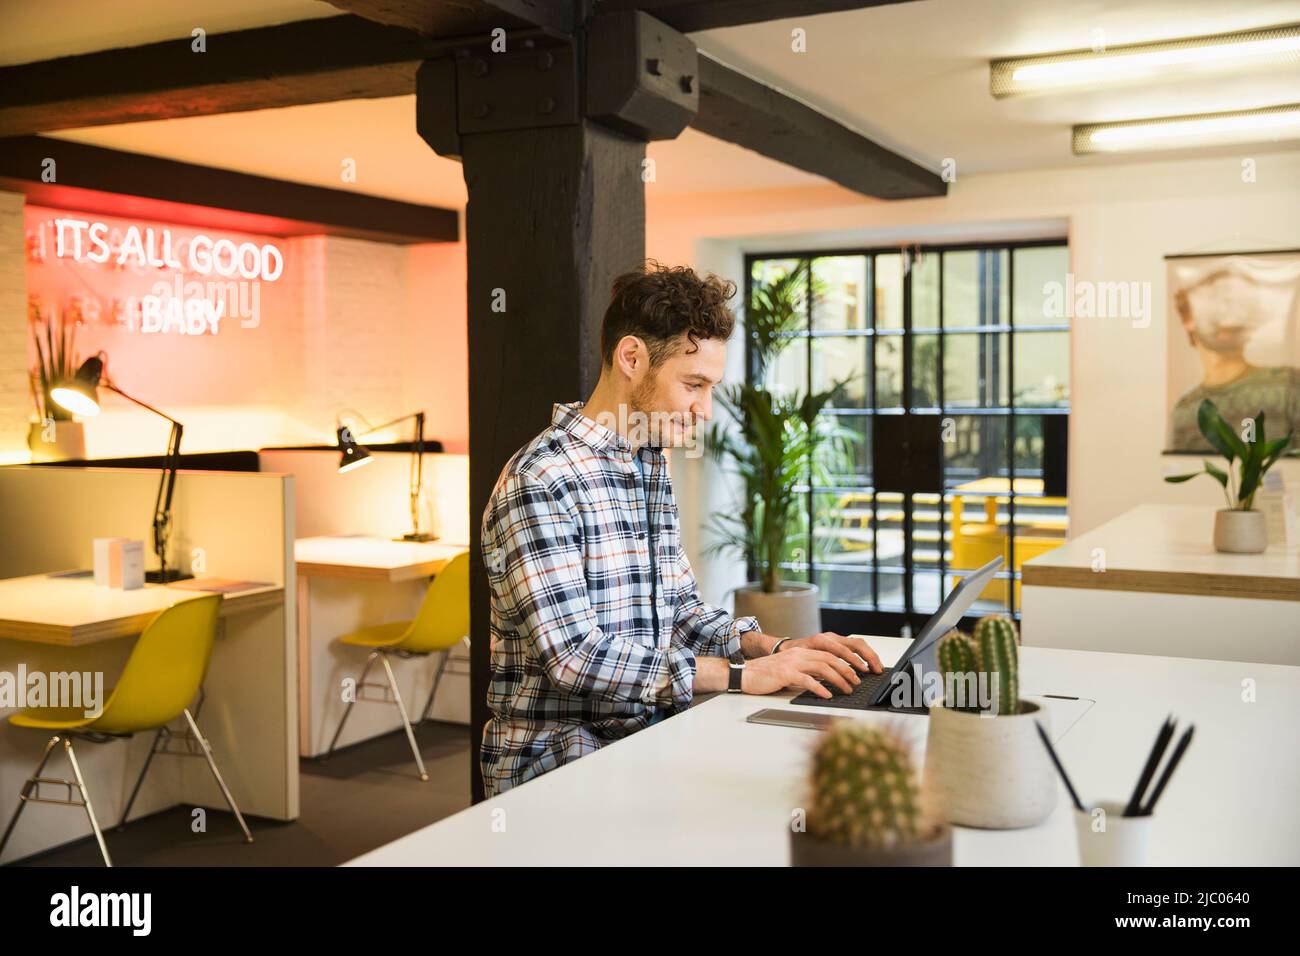 Young man in co-working space working on tablet Stock Photo